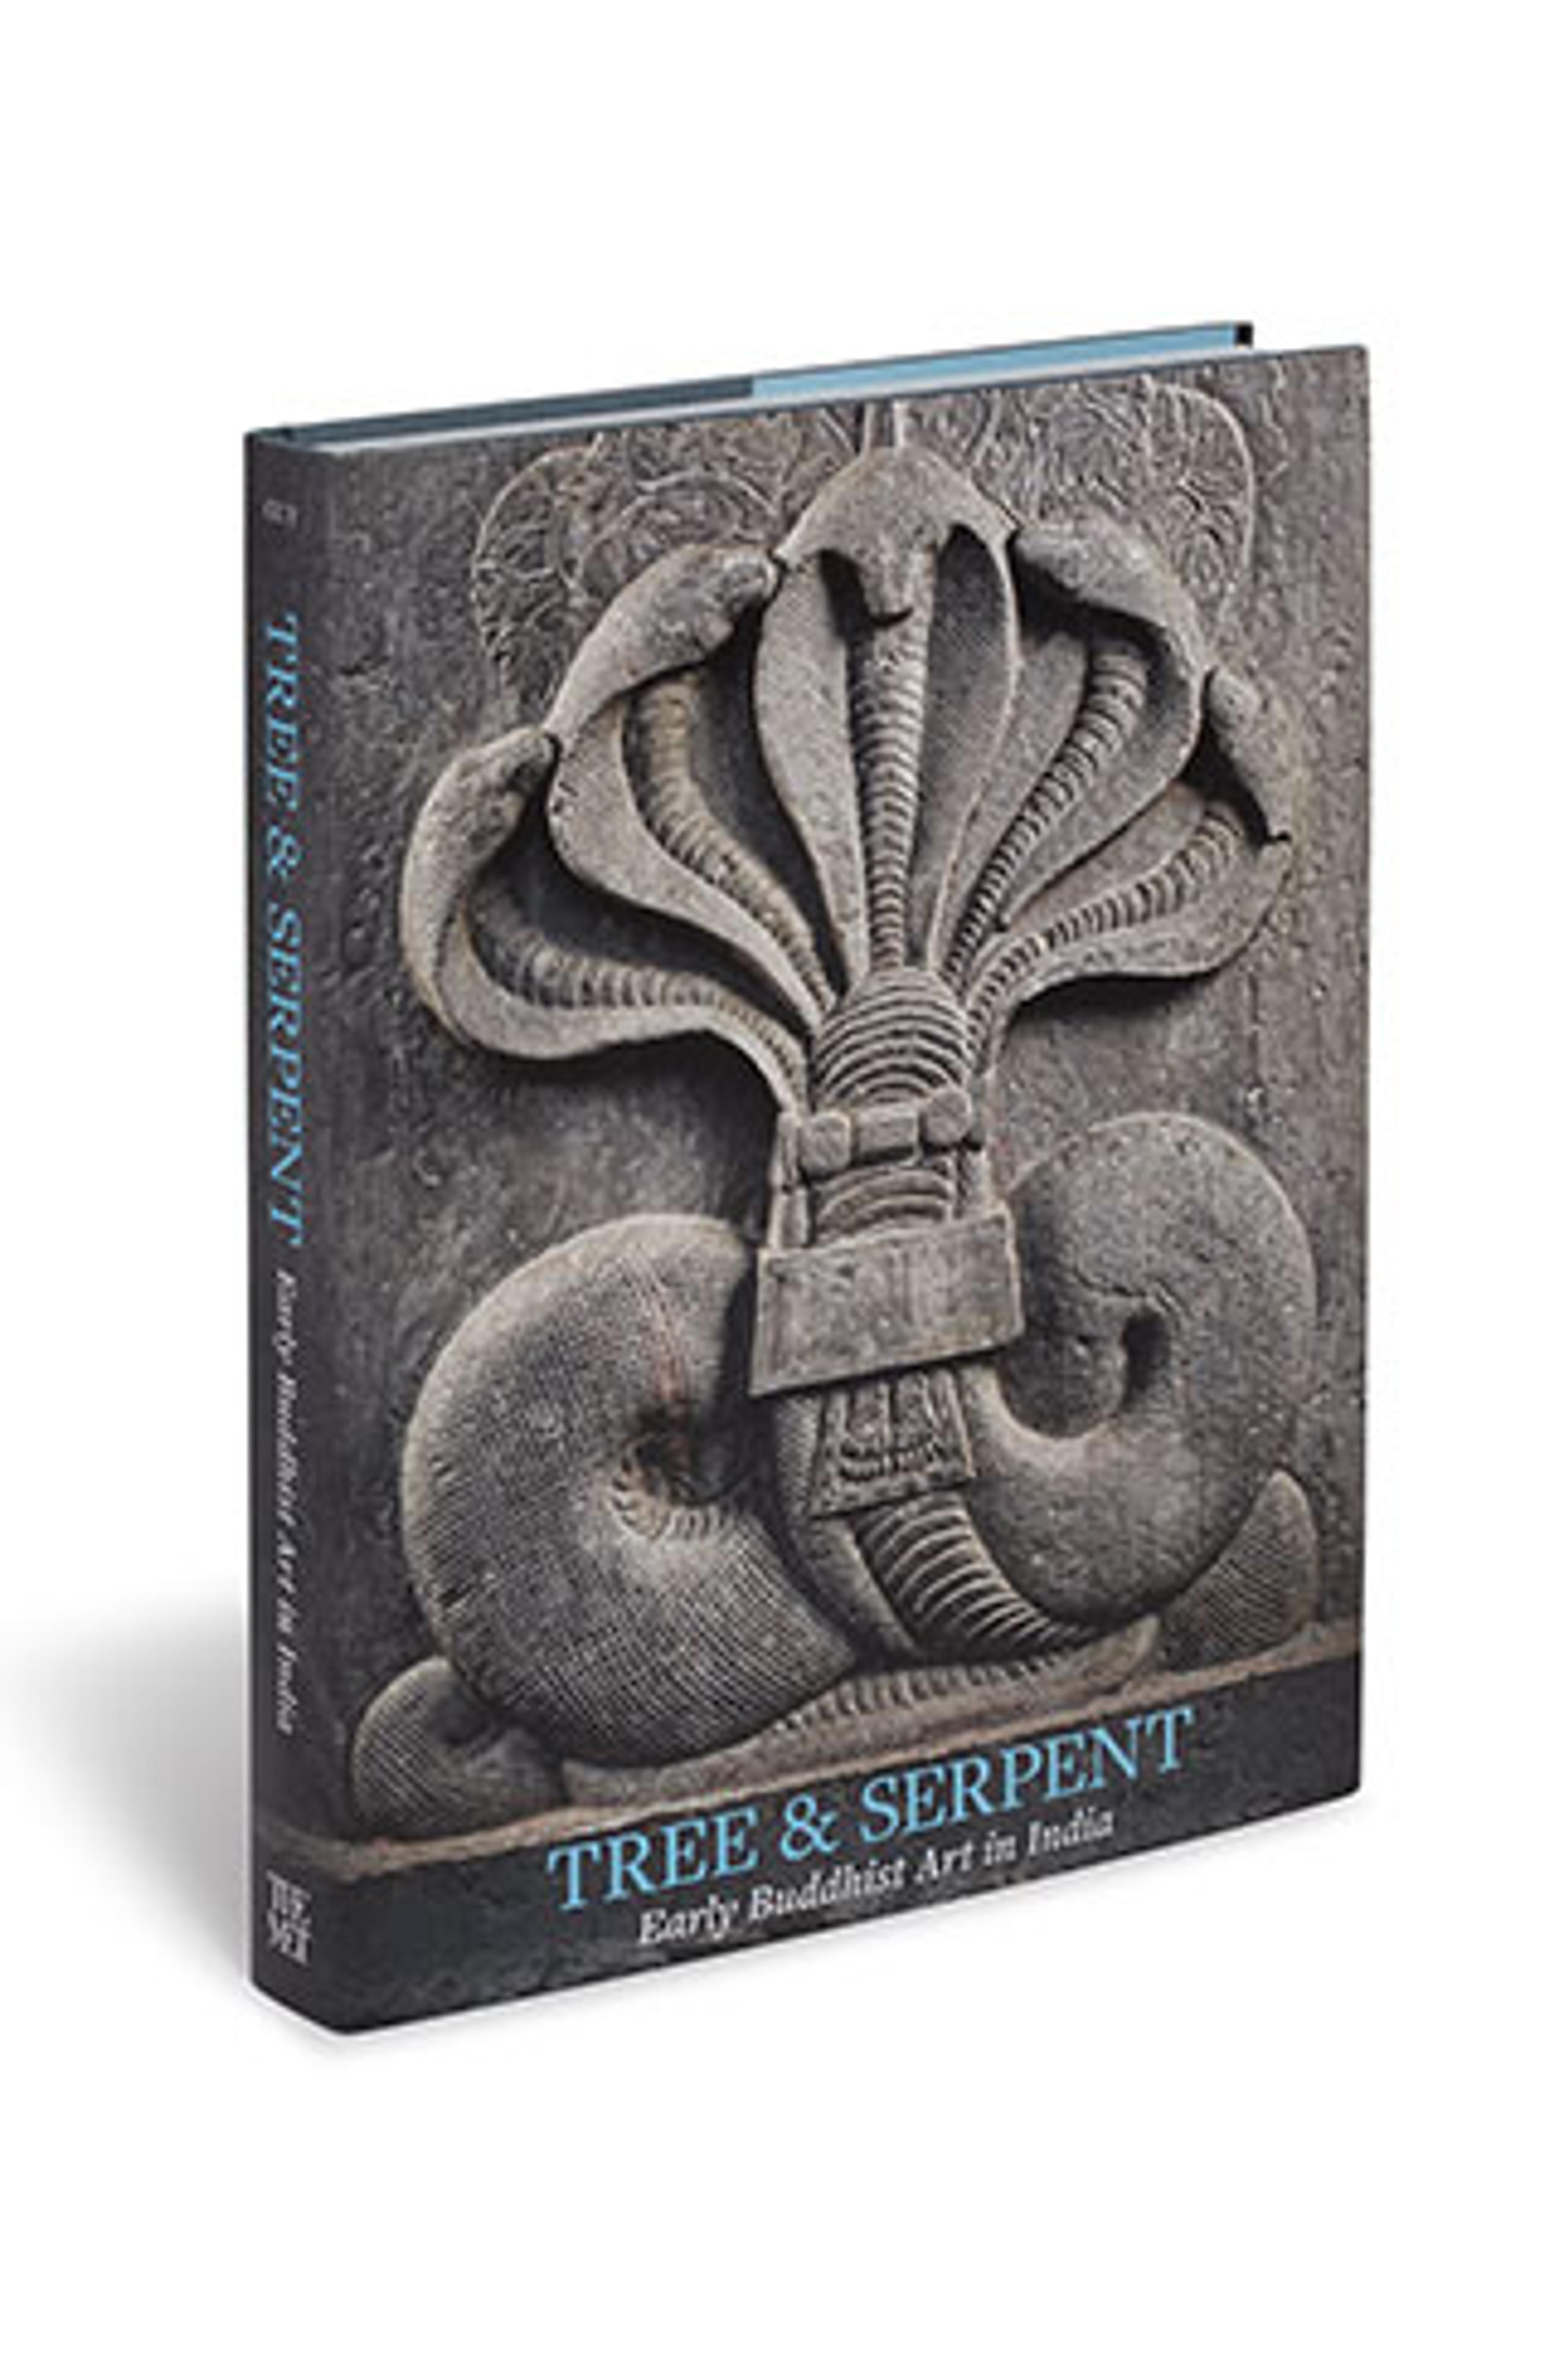 Book featuring a grey stone of a statue with a fiver headed cobra